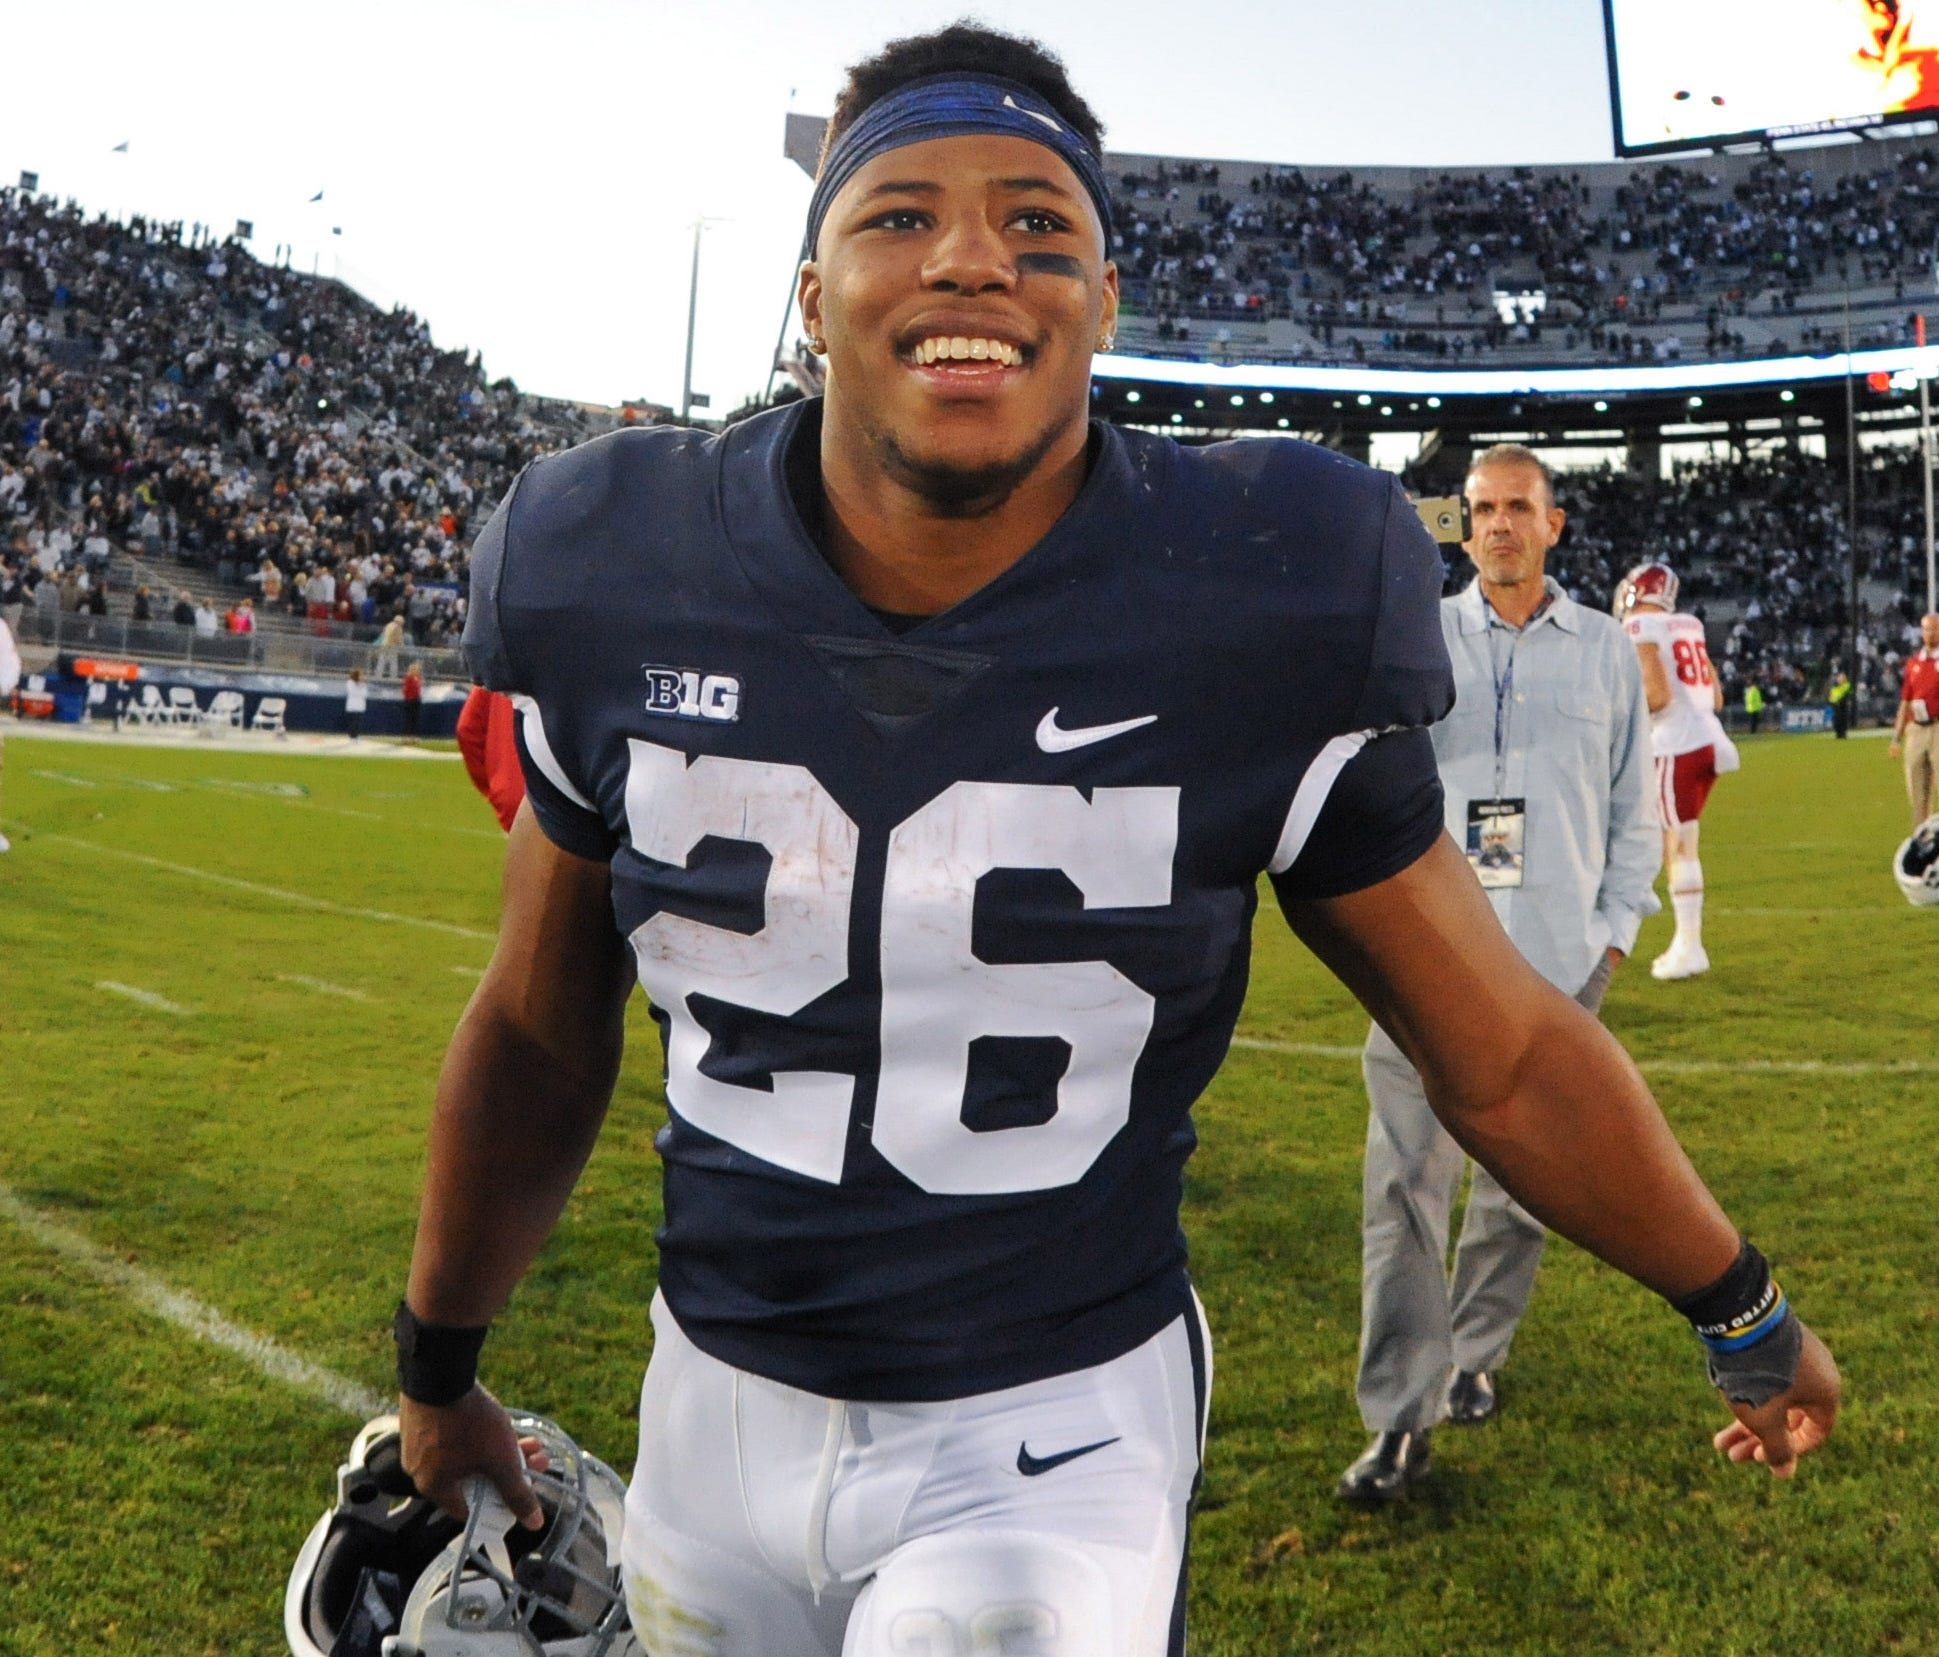 Penn State running back Saquon Barkley walks off the field after the Nittany Lions defeated Indiana at Beaver Stadium.